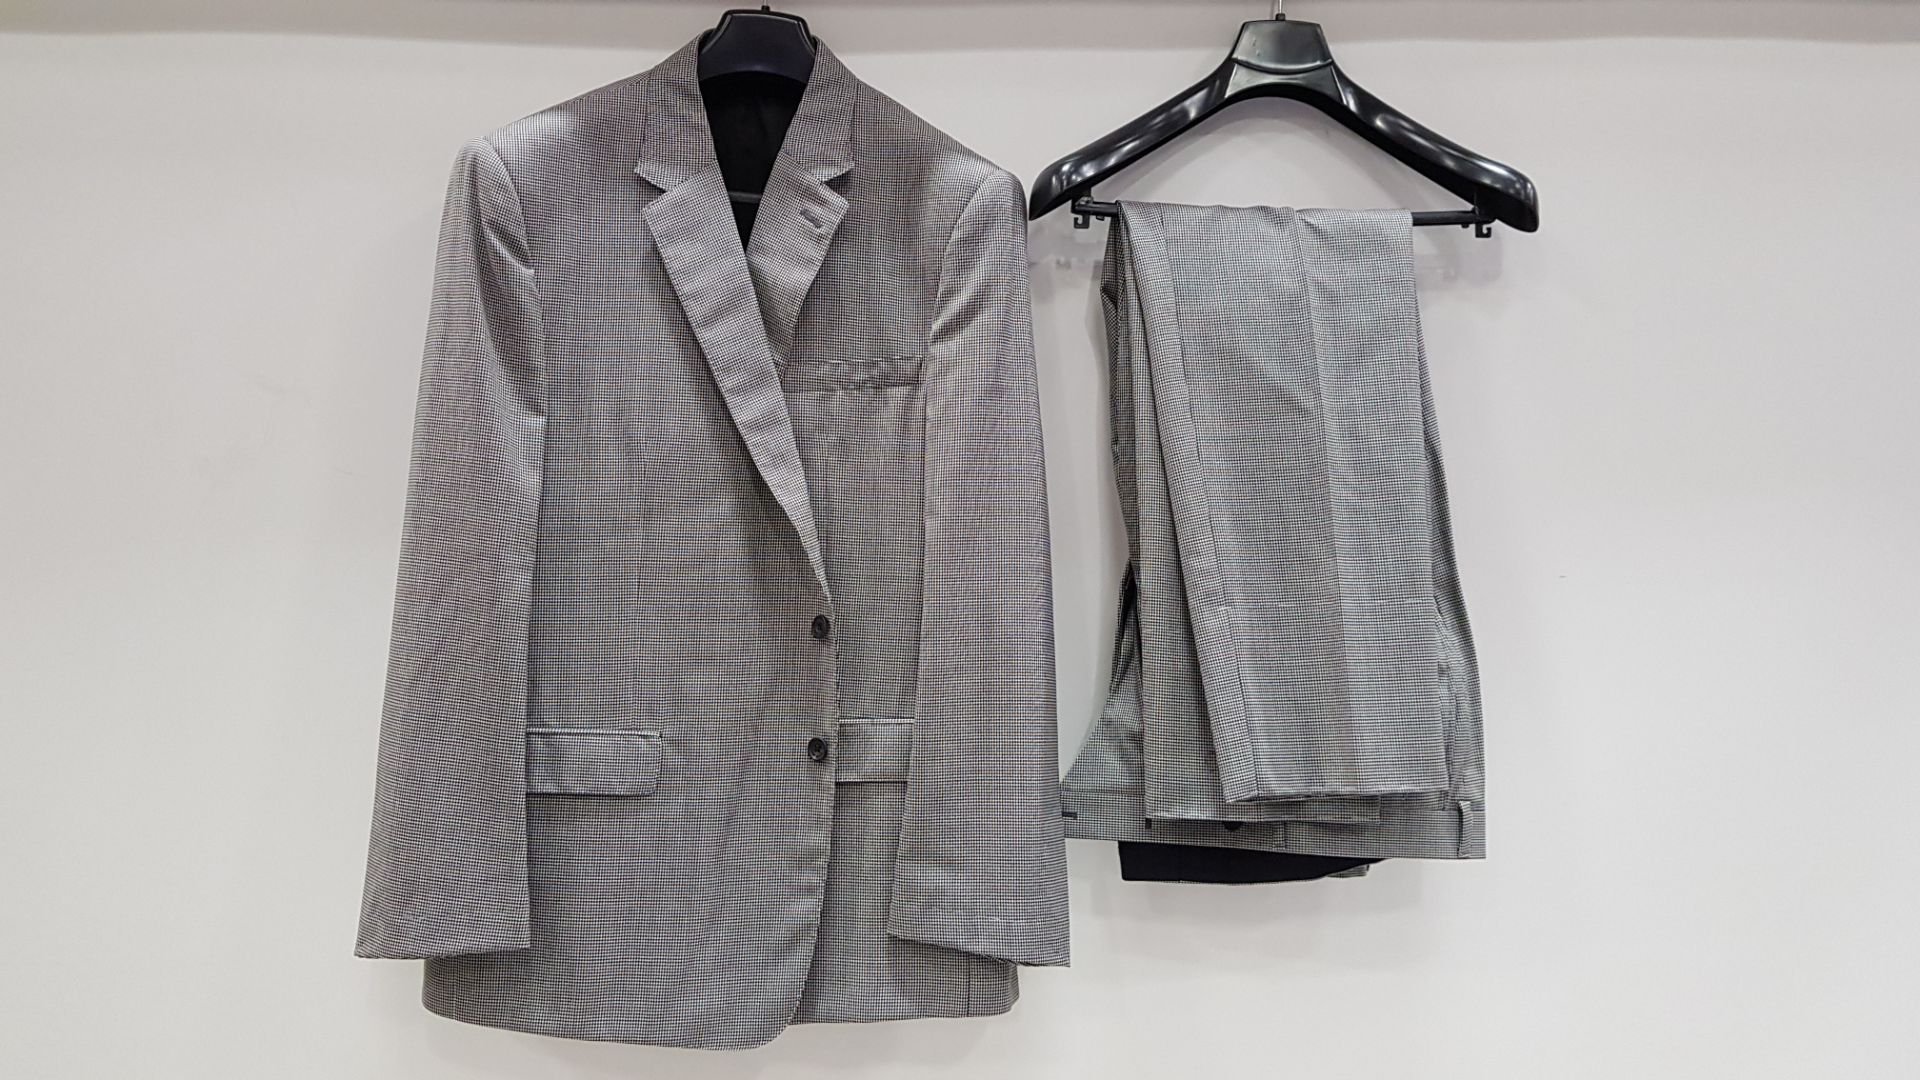 3 X BRAND NEW LUTWYCHE HAND TAILORED LIGHT GREY PATTERNED SUITS SIZE 40R AND 40L (PLEASE NOTE